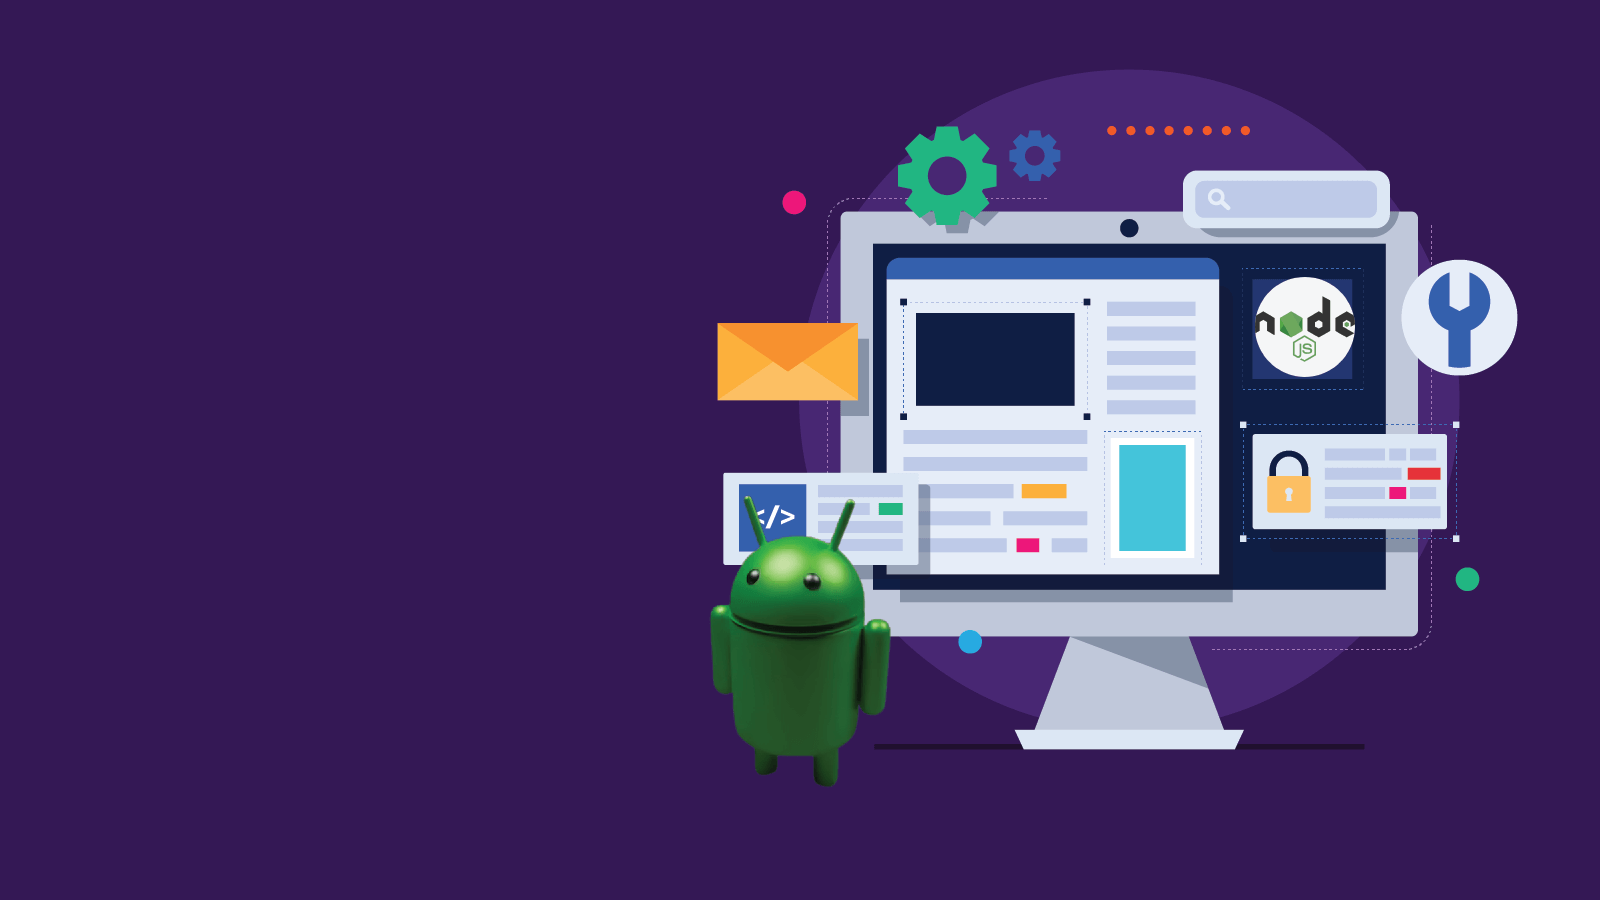 Step by step guide to setup React-native in windows using Android Studio and NodeJS